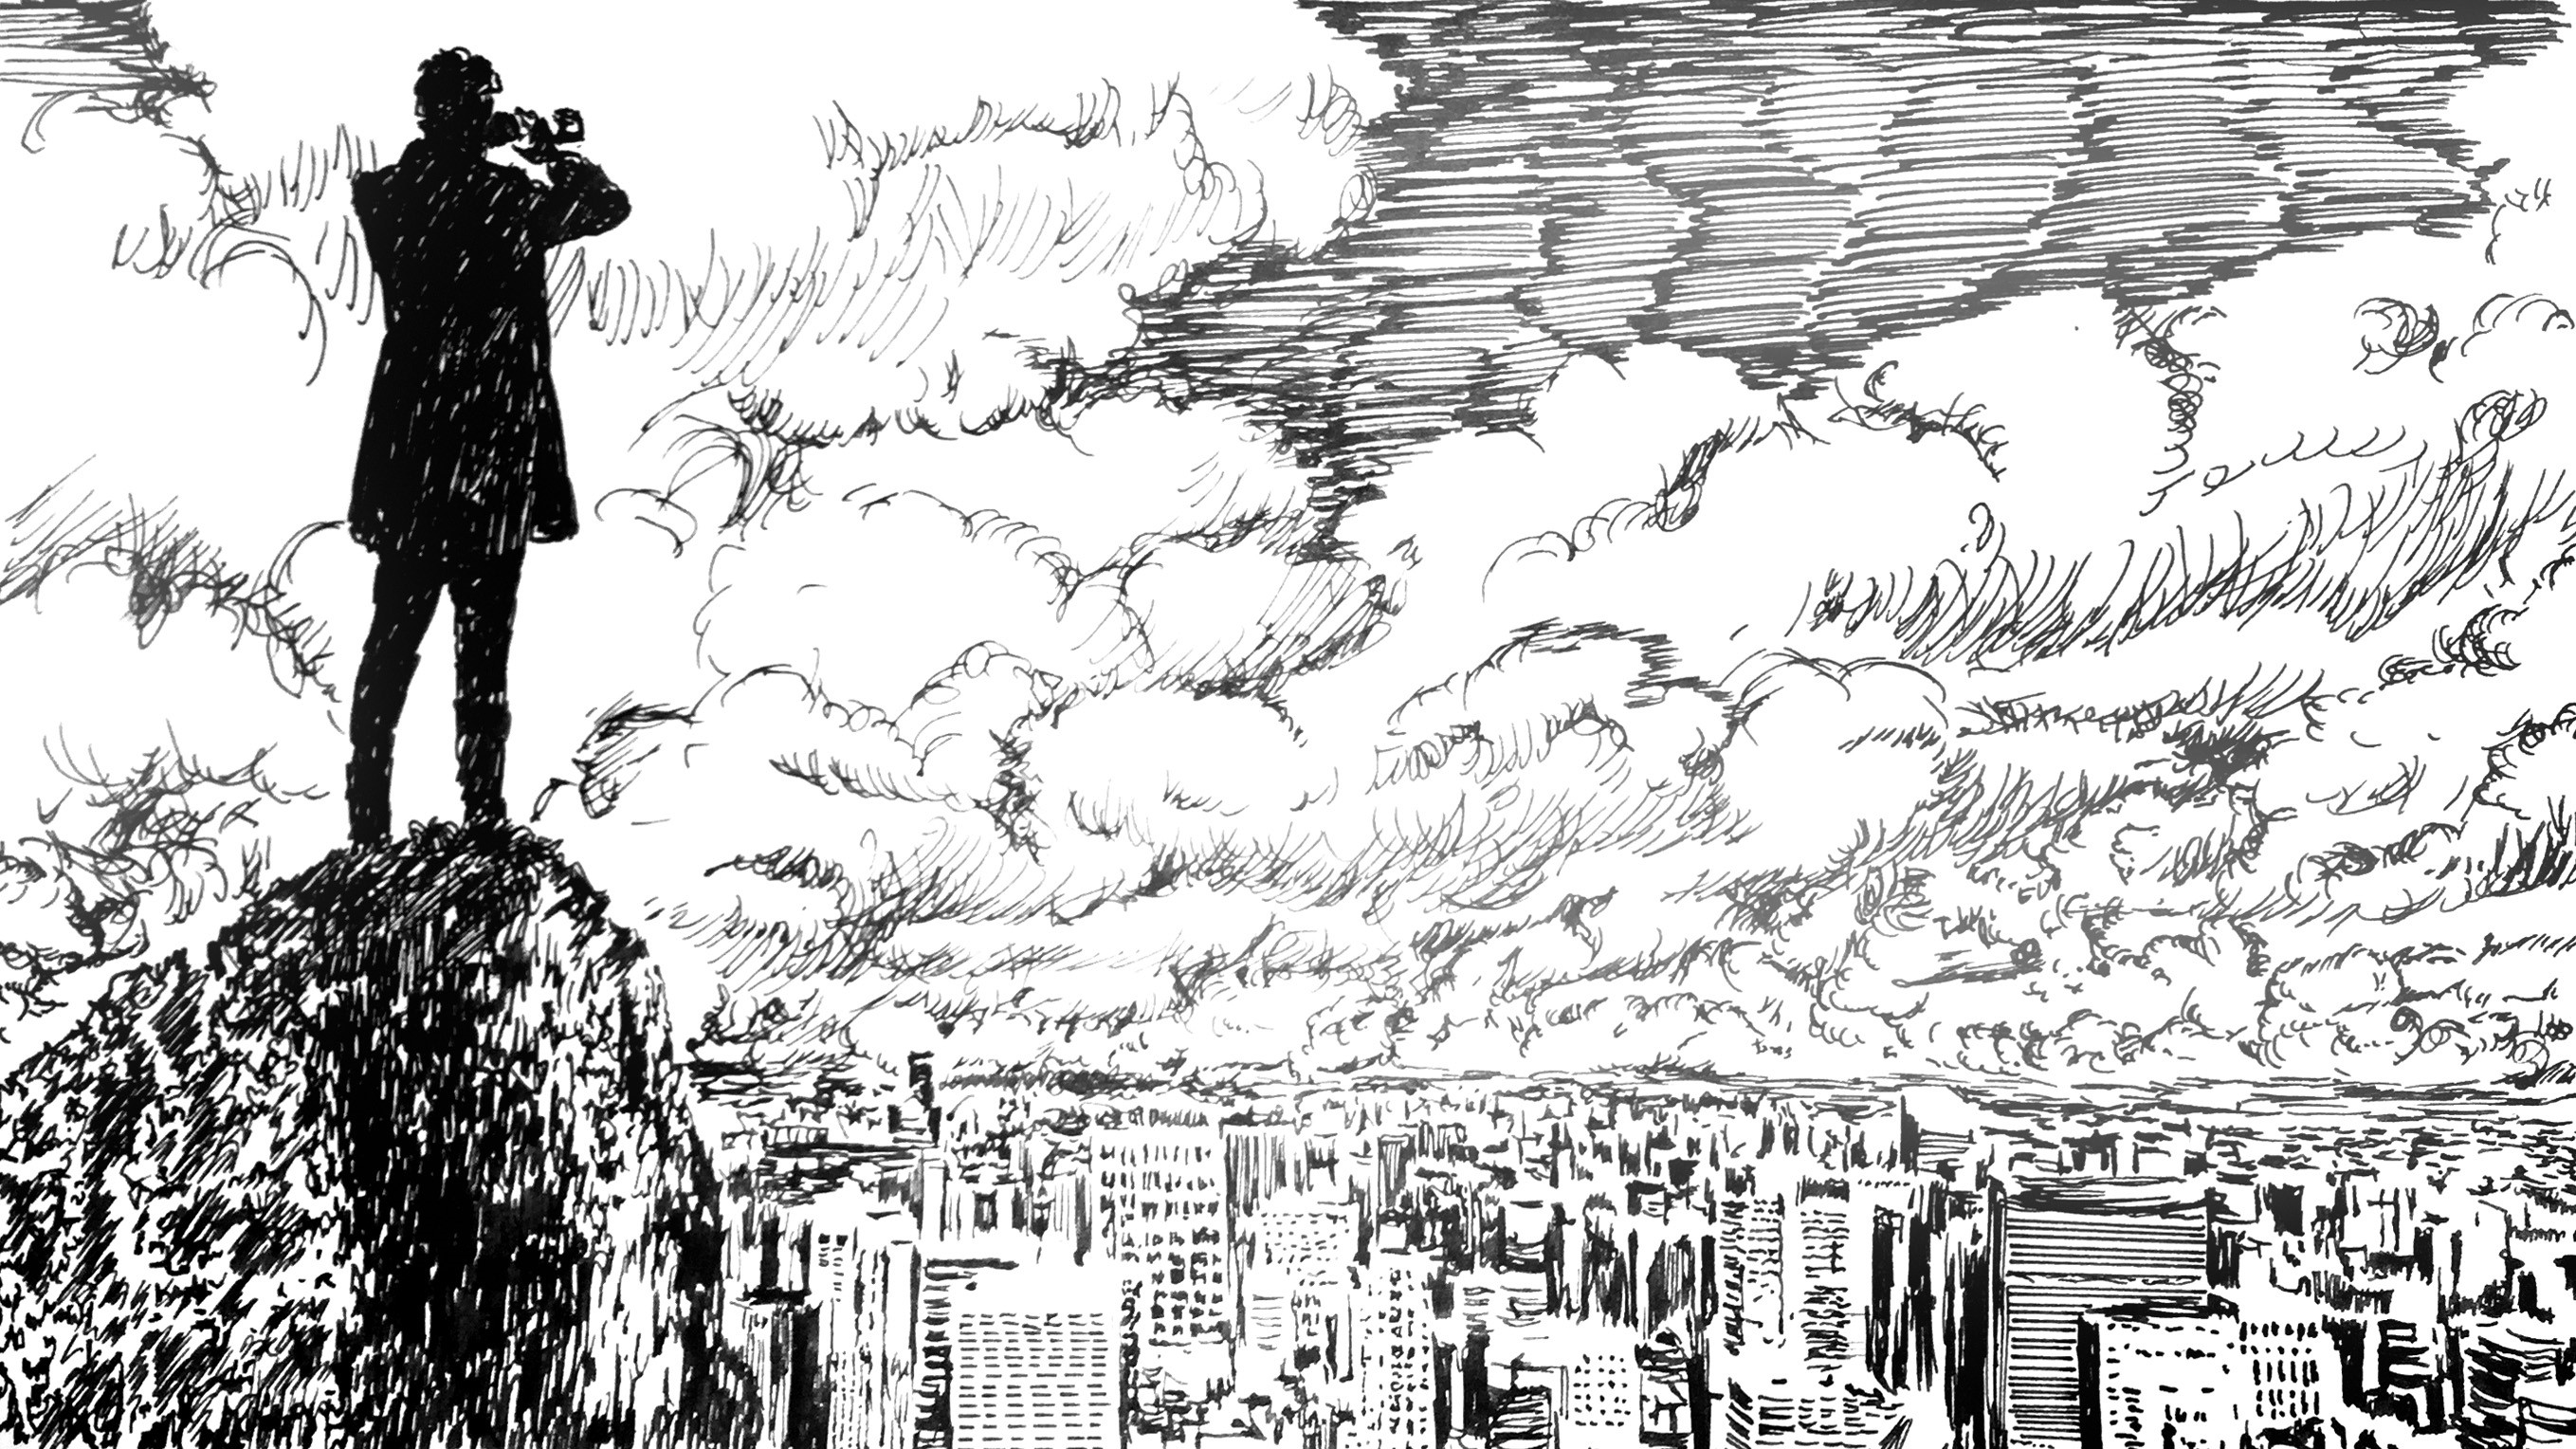 A person stands on a hill overlooking a city.